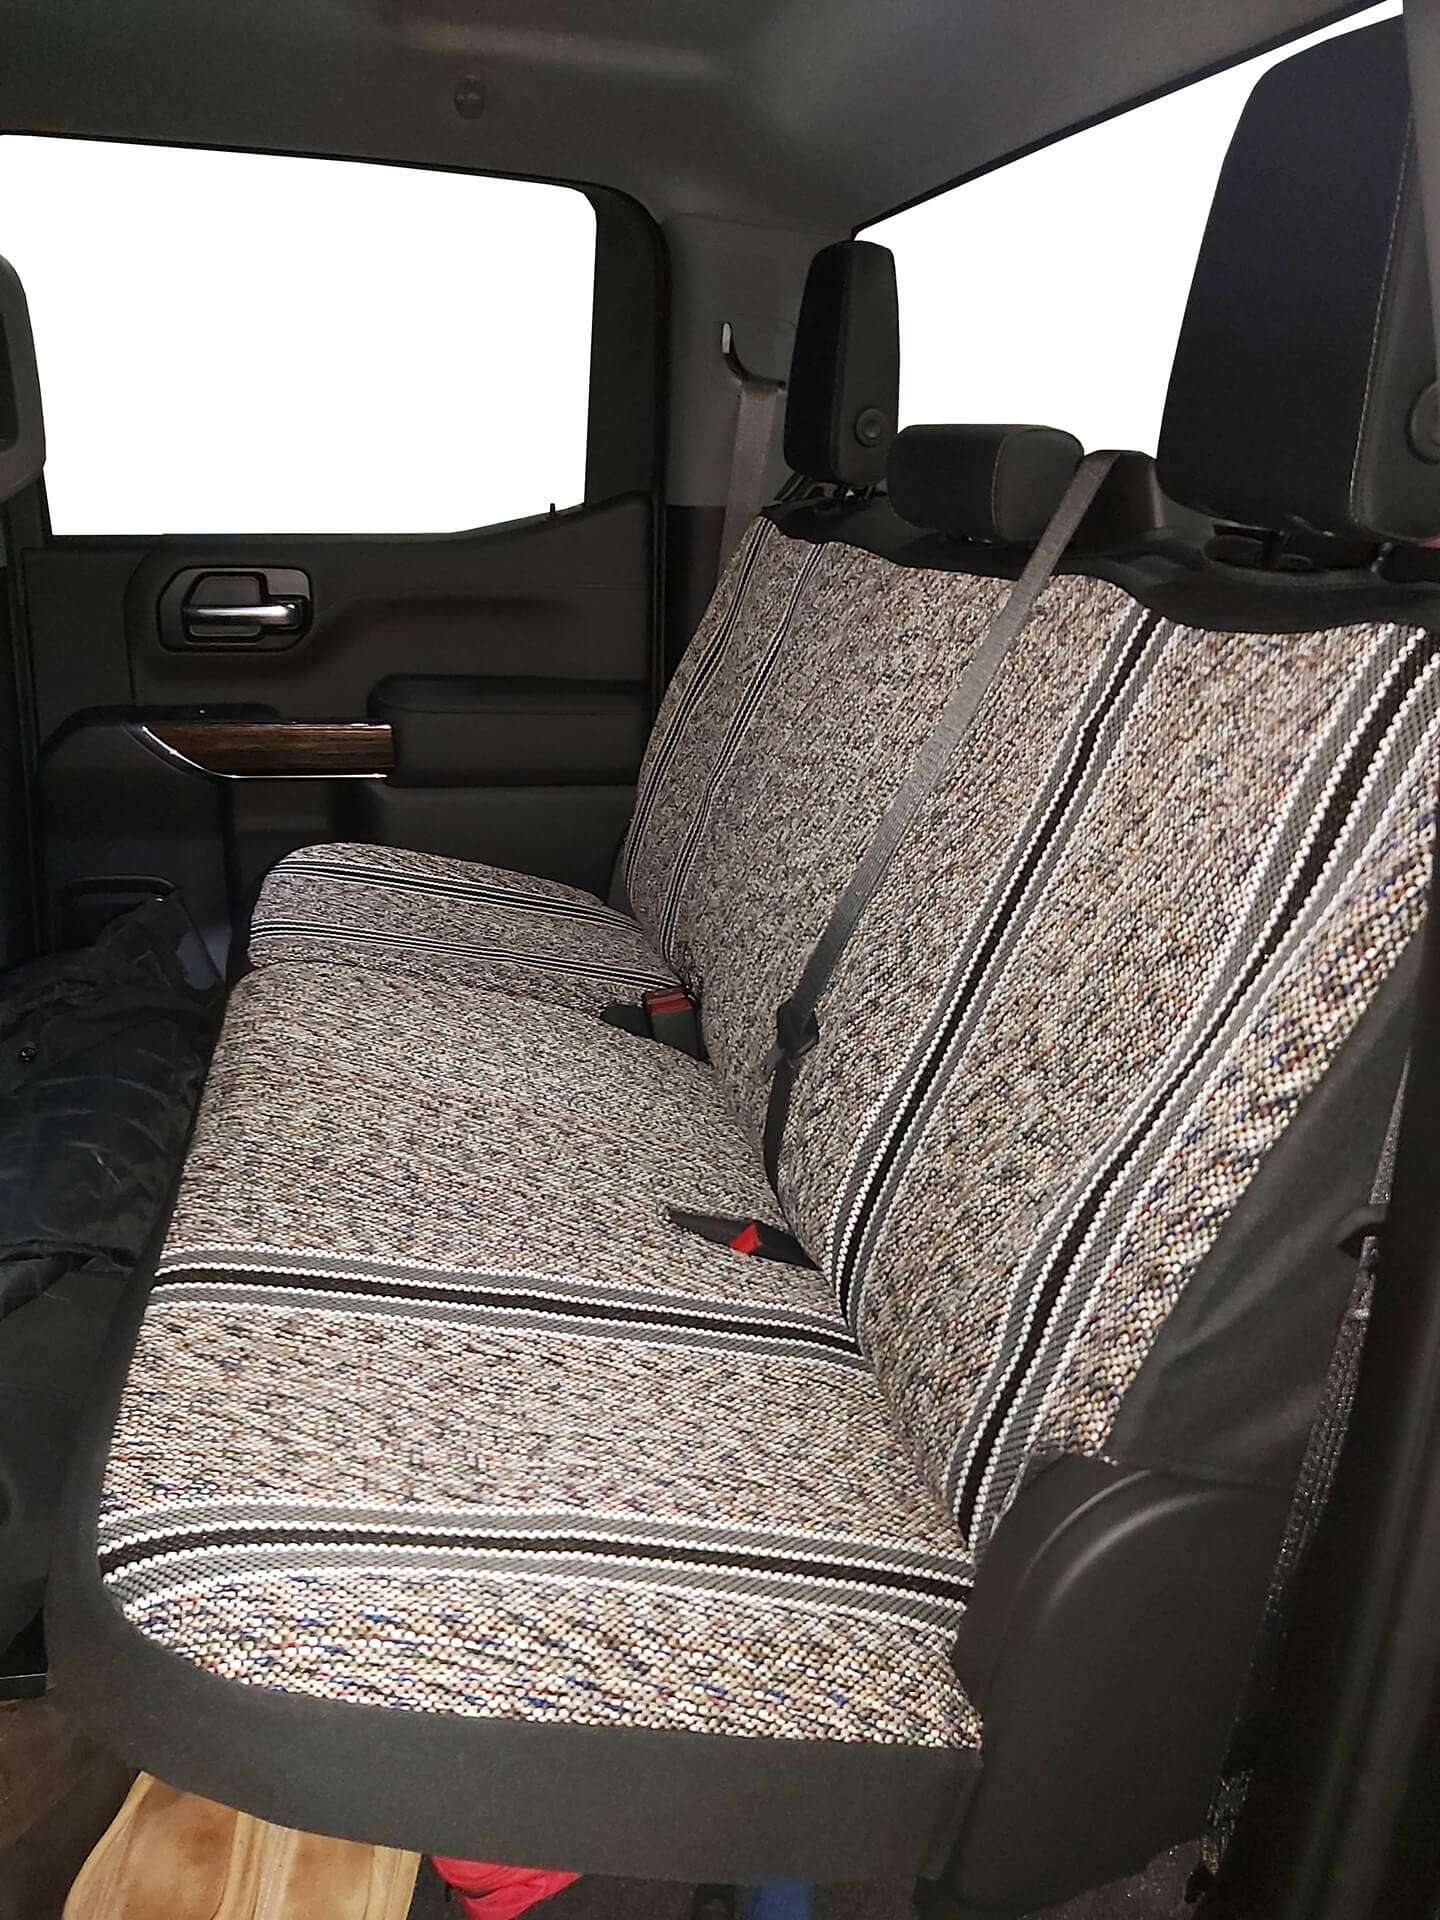 Gmc Sierra Seat Covers For Truck Western Cover - 2008 Gmc Sierra Truck Seat Covers